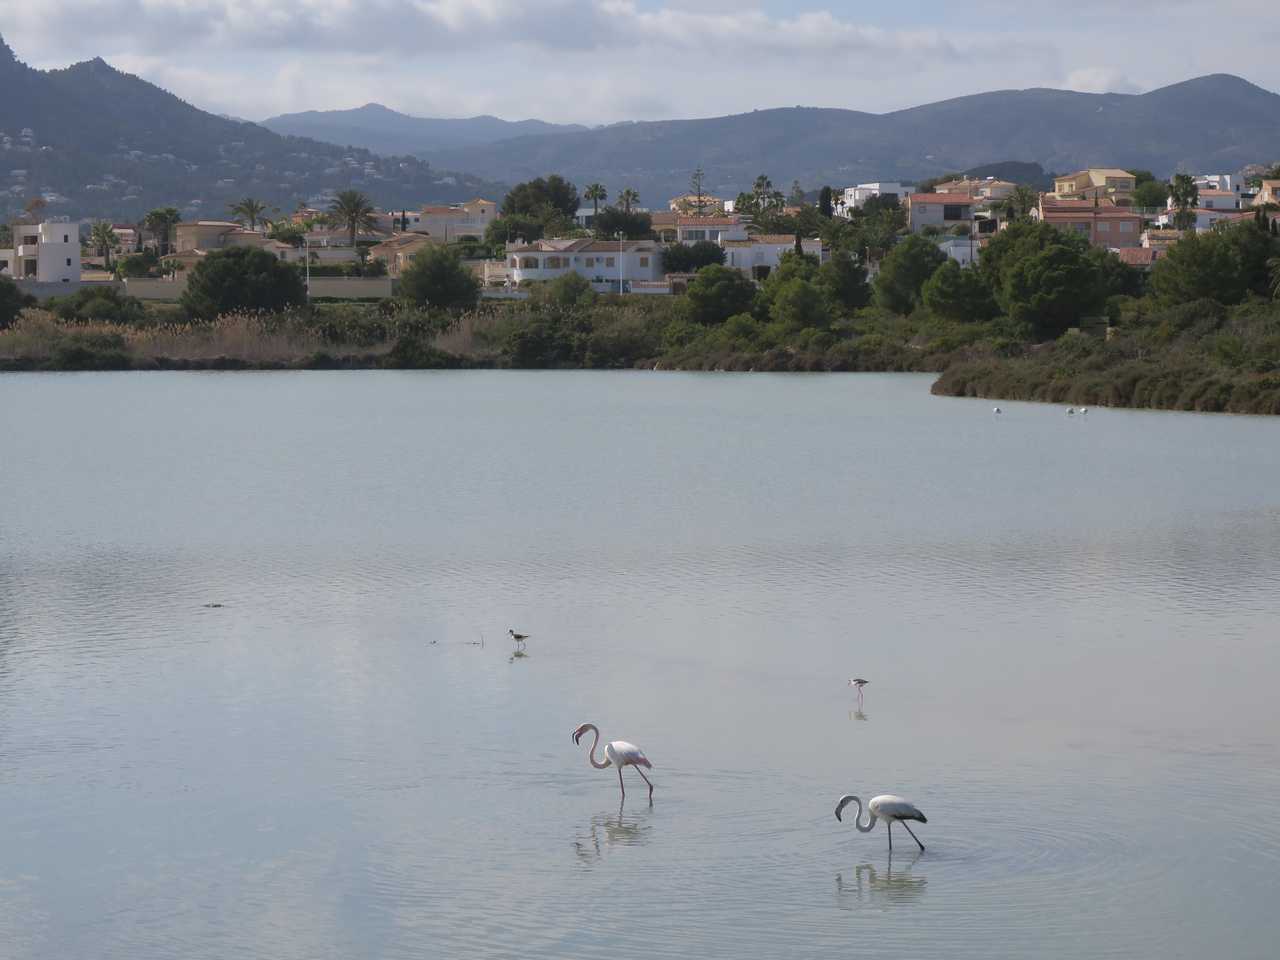 Another day, another set of flamingos (Black Winged Stilts behind).